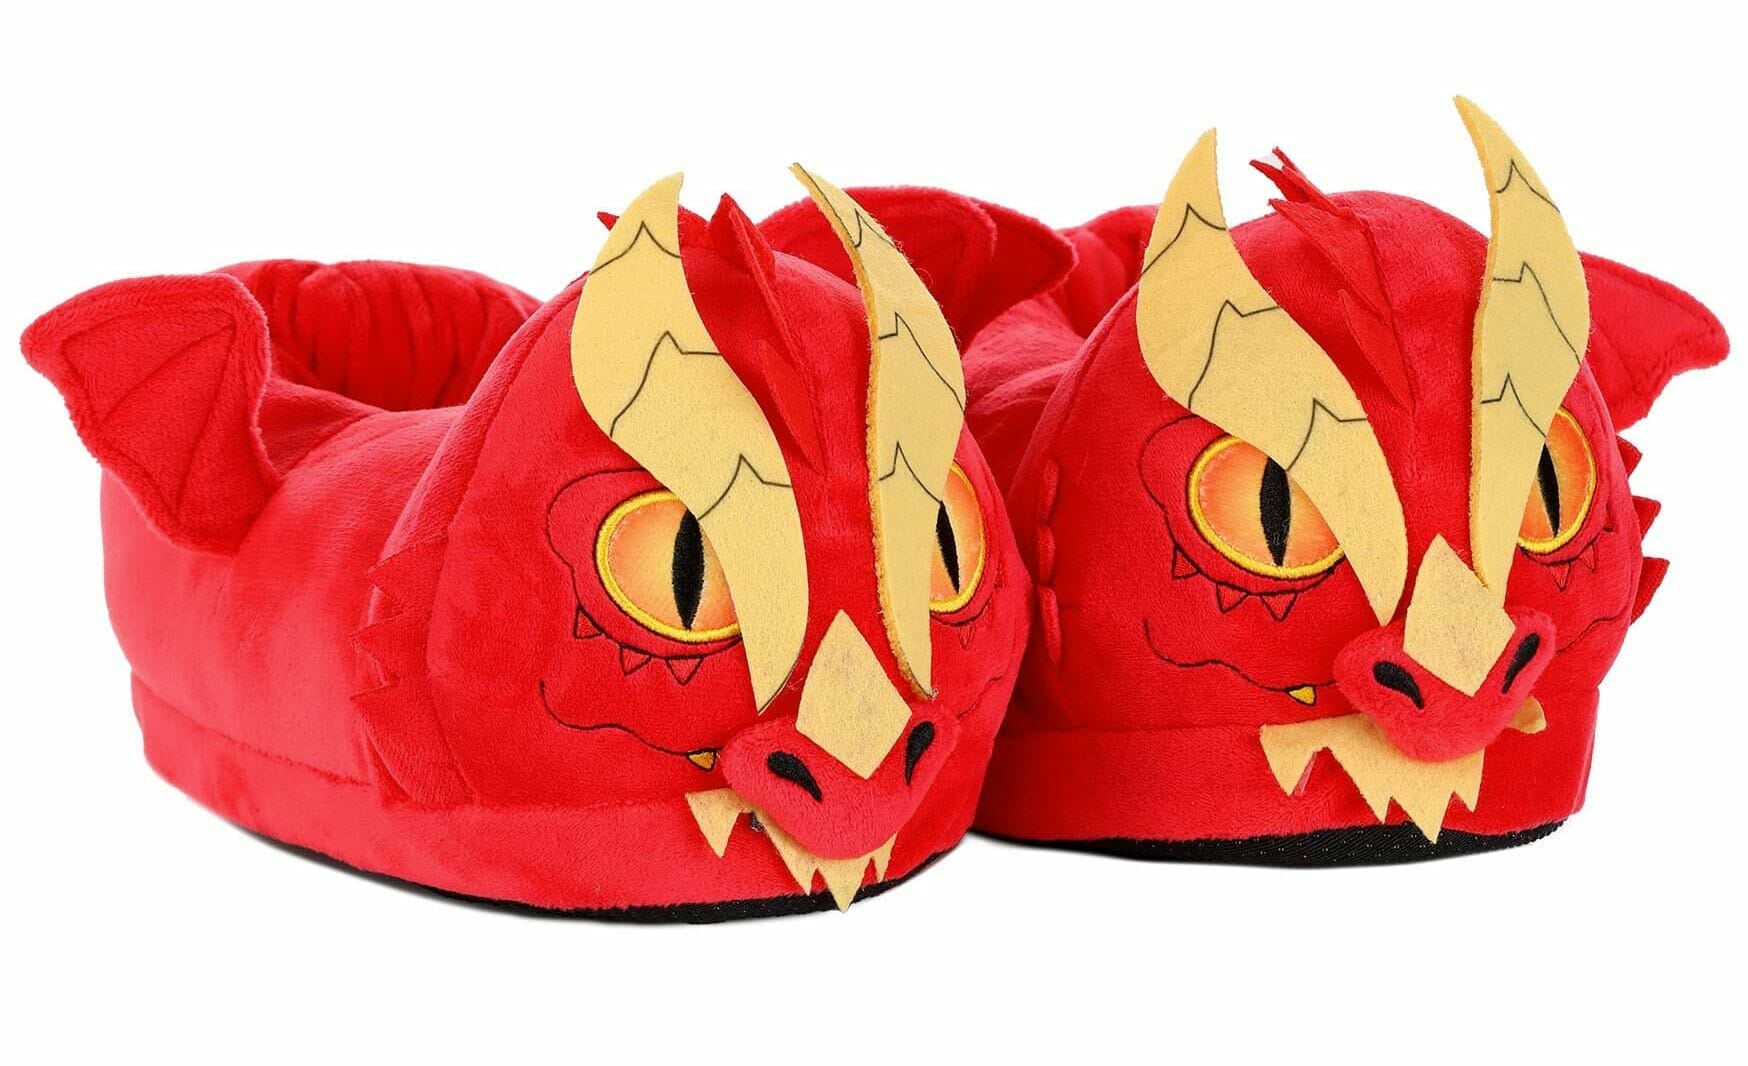 Red dragon slippers